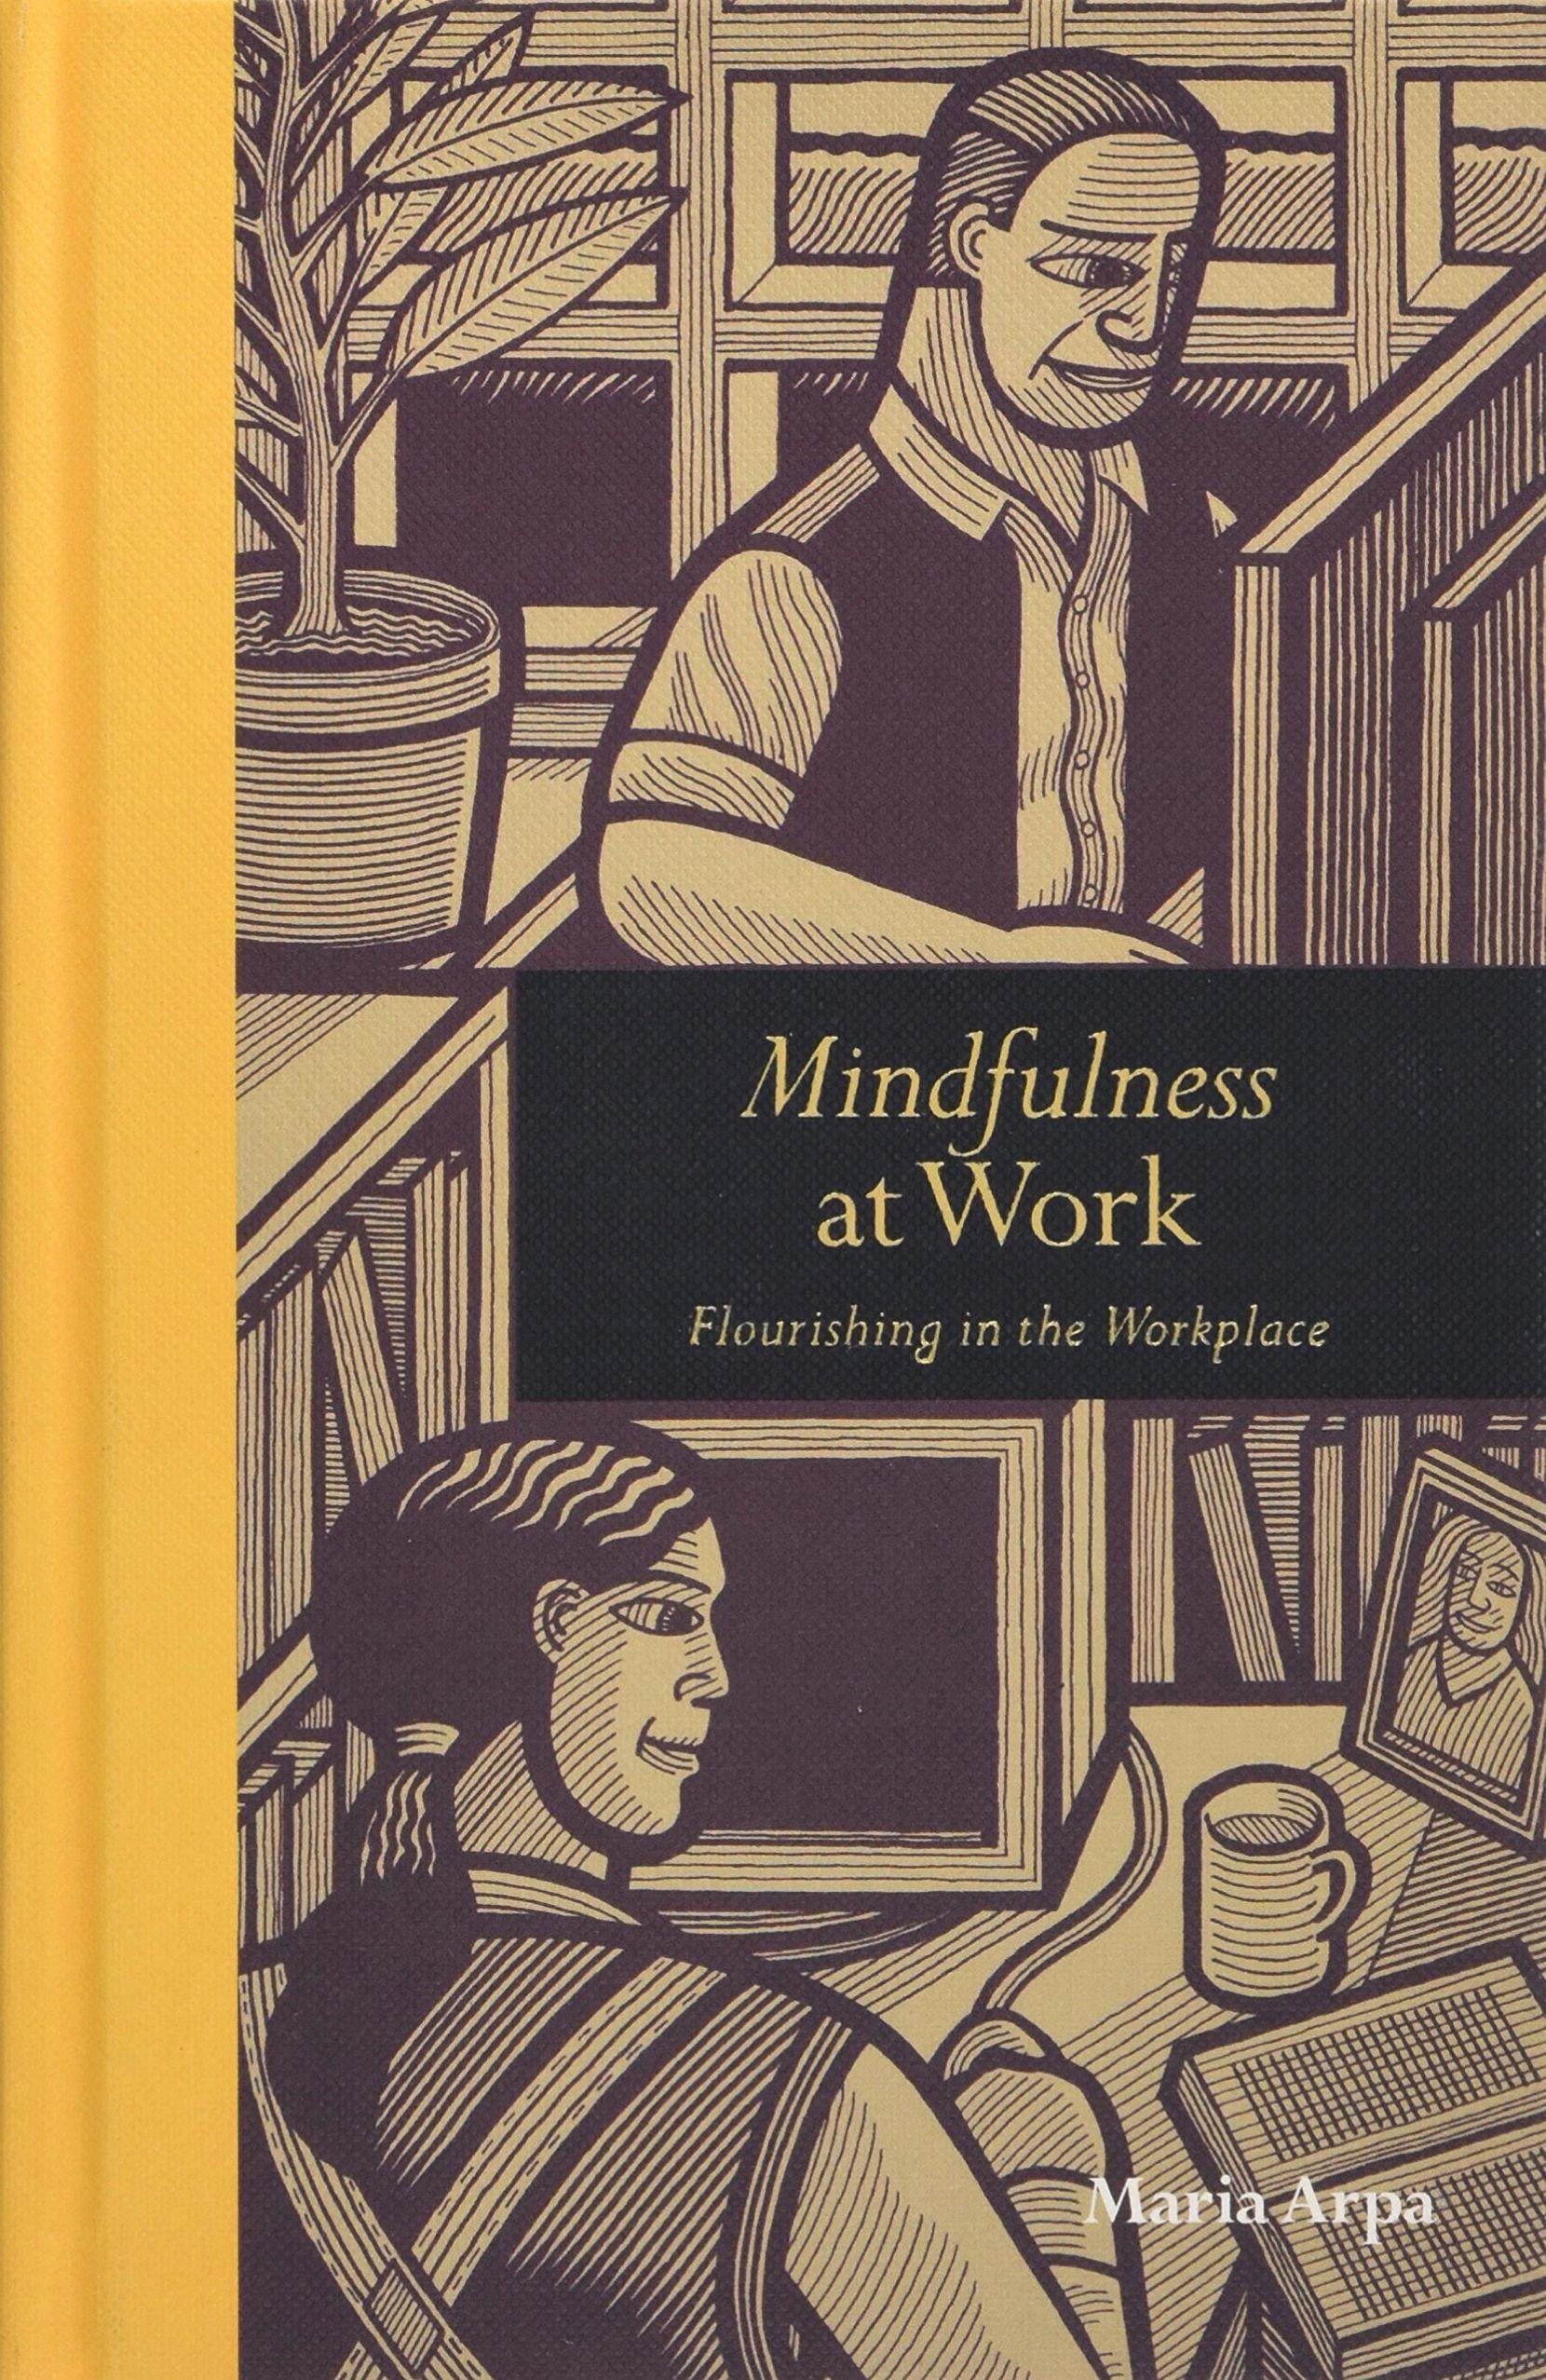 Mindfulness at Work: Flourishing in the Workplace